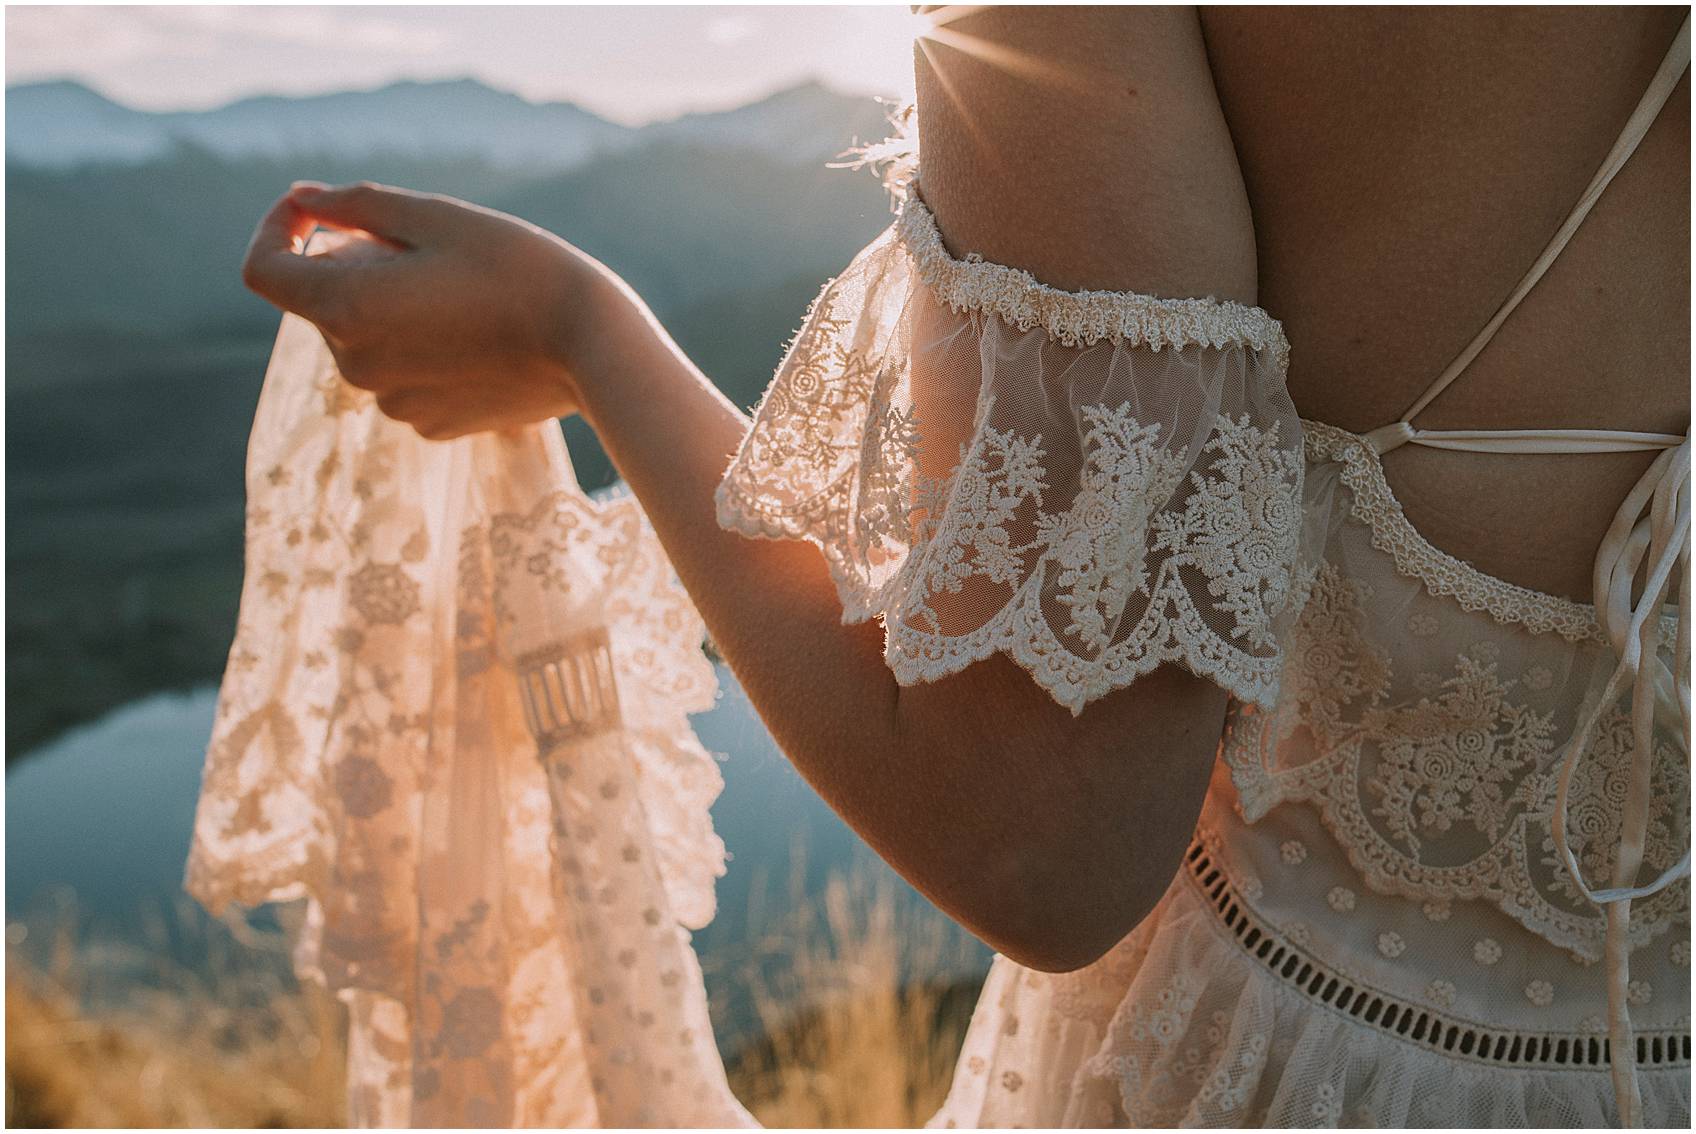 Charlotte Kiri Photography - elopement photography showing the back of a bride's dress with vintage lace and off-shoulder details, the bride is holding her train with the view of lakes, mountains and sunsets shining through in the background